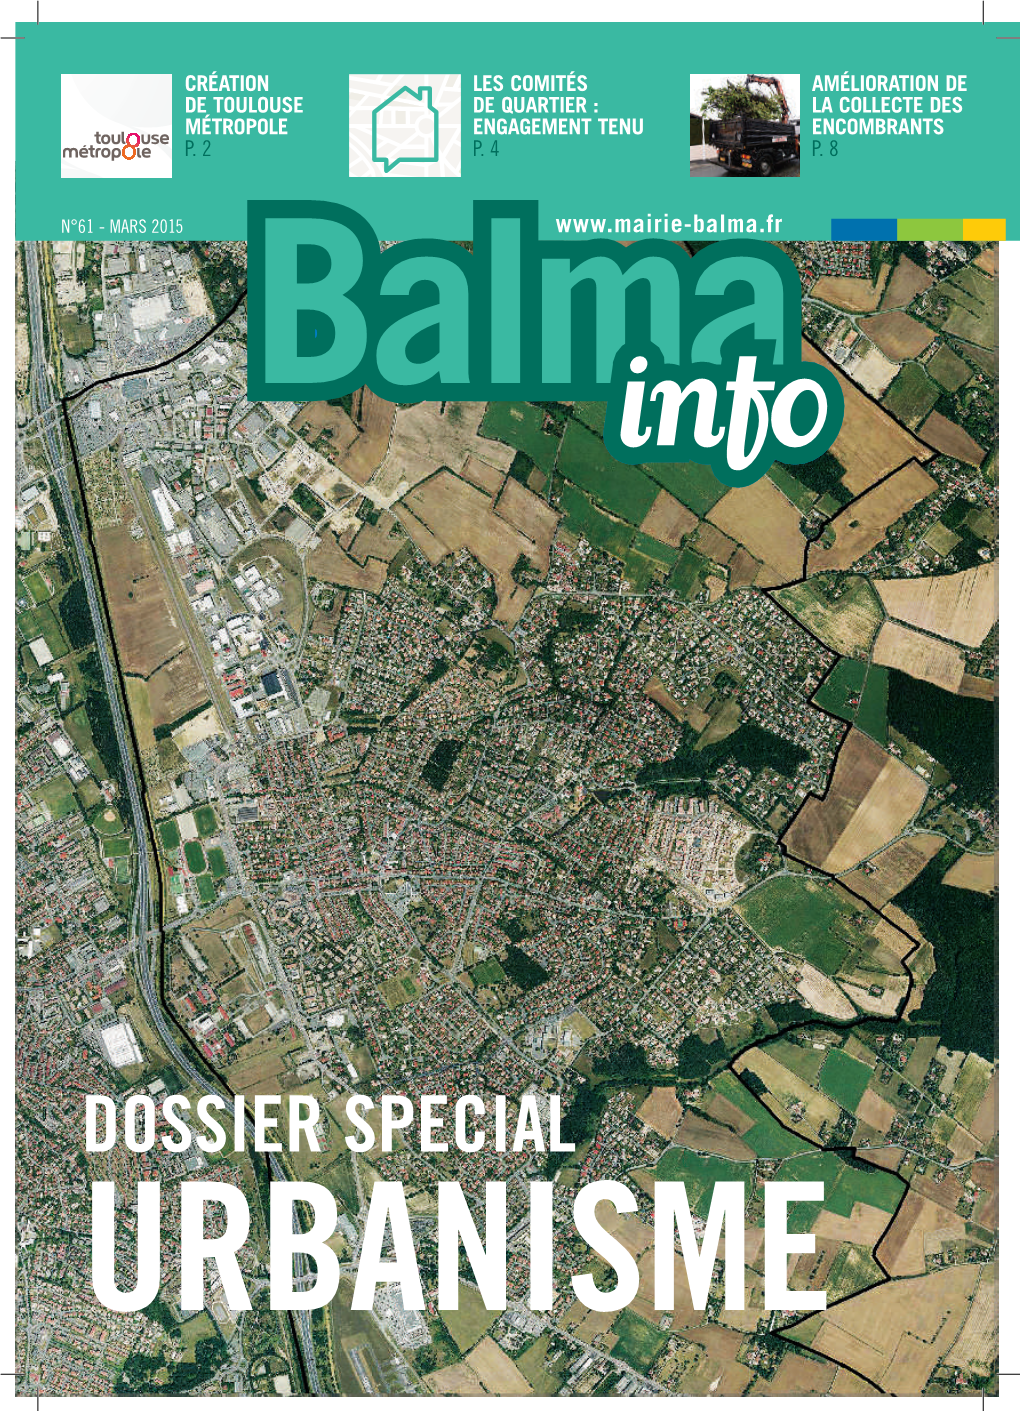 Dossier Special